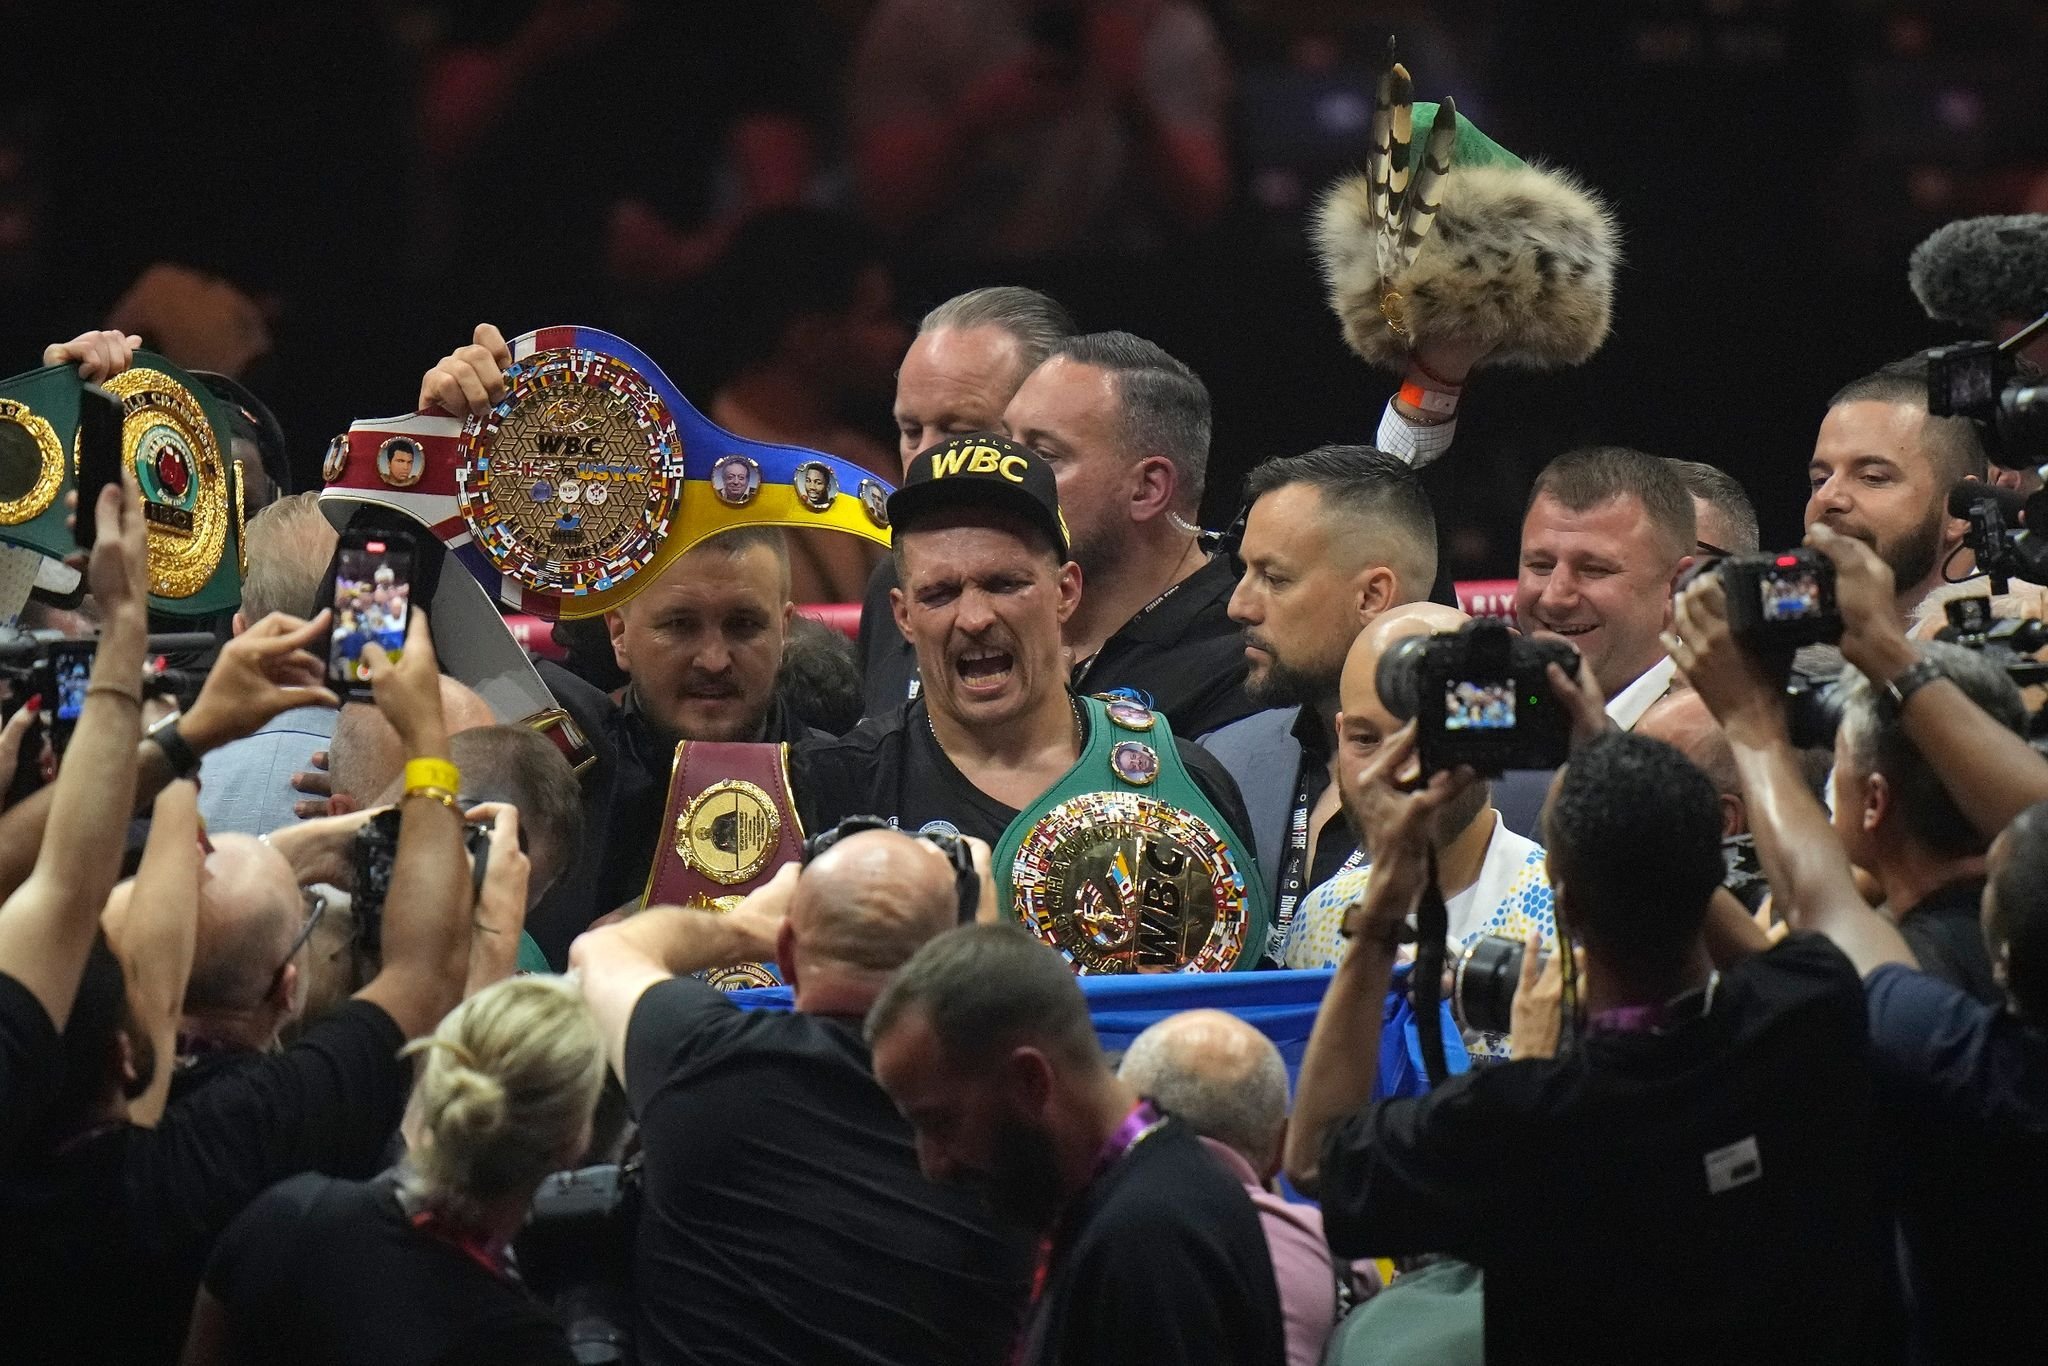 Heavyweight title duel: skilled boxer Usyk defeats Fury